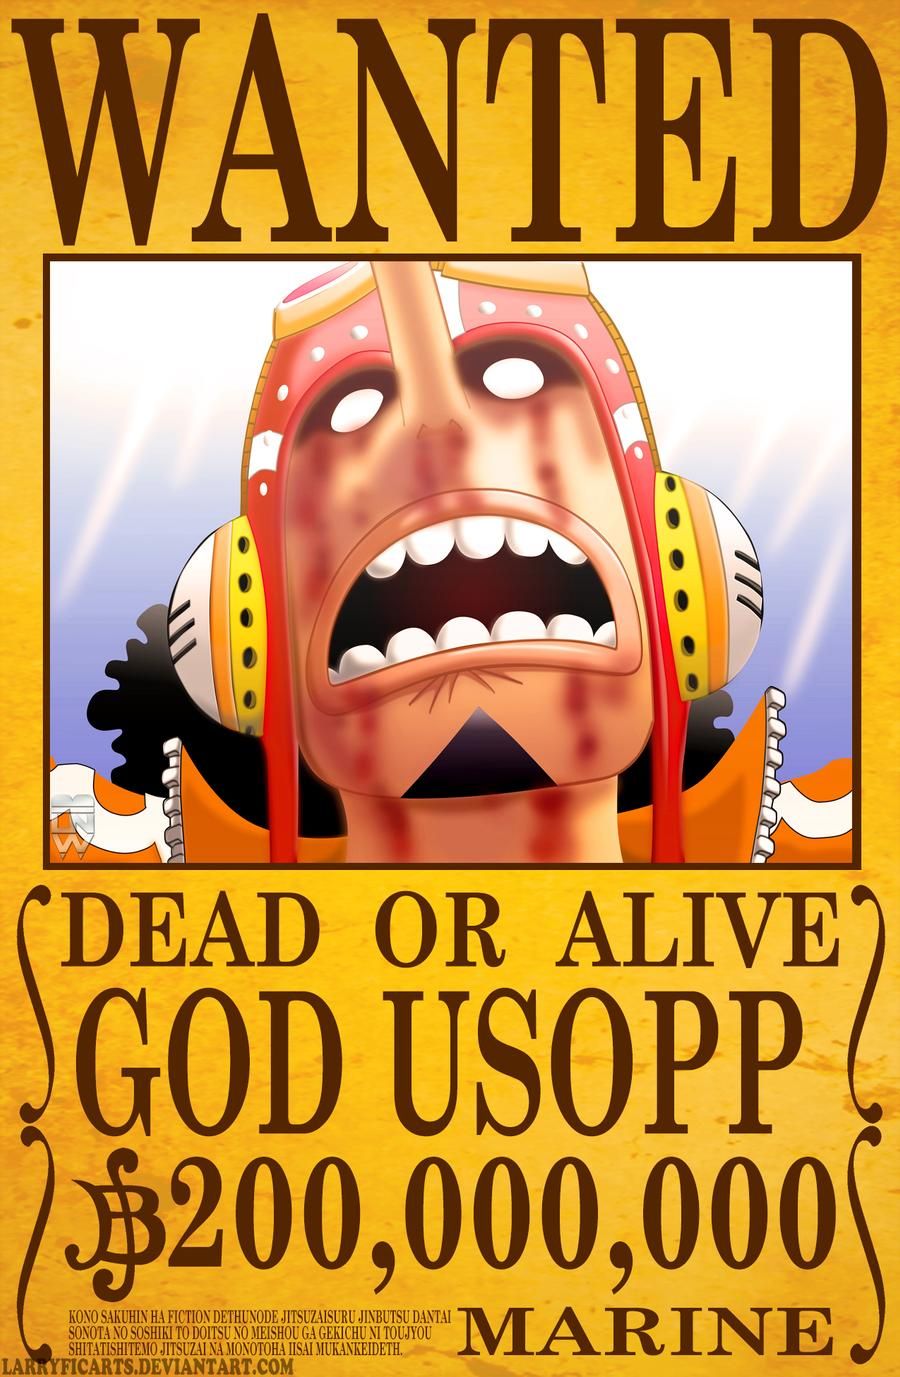 God Usopp Wanted Poster. Usopp, One piece luffy, One piece bounties